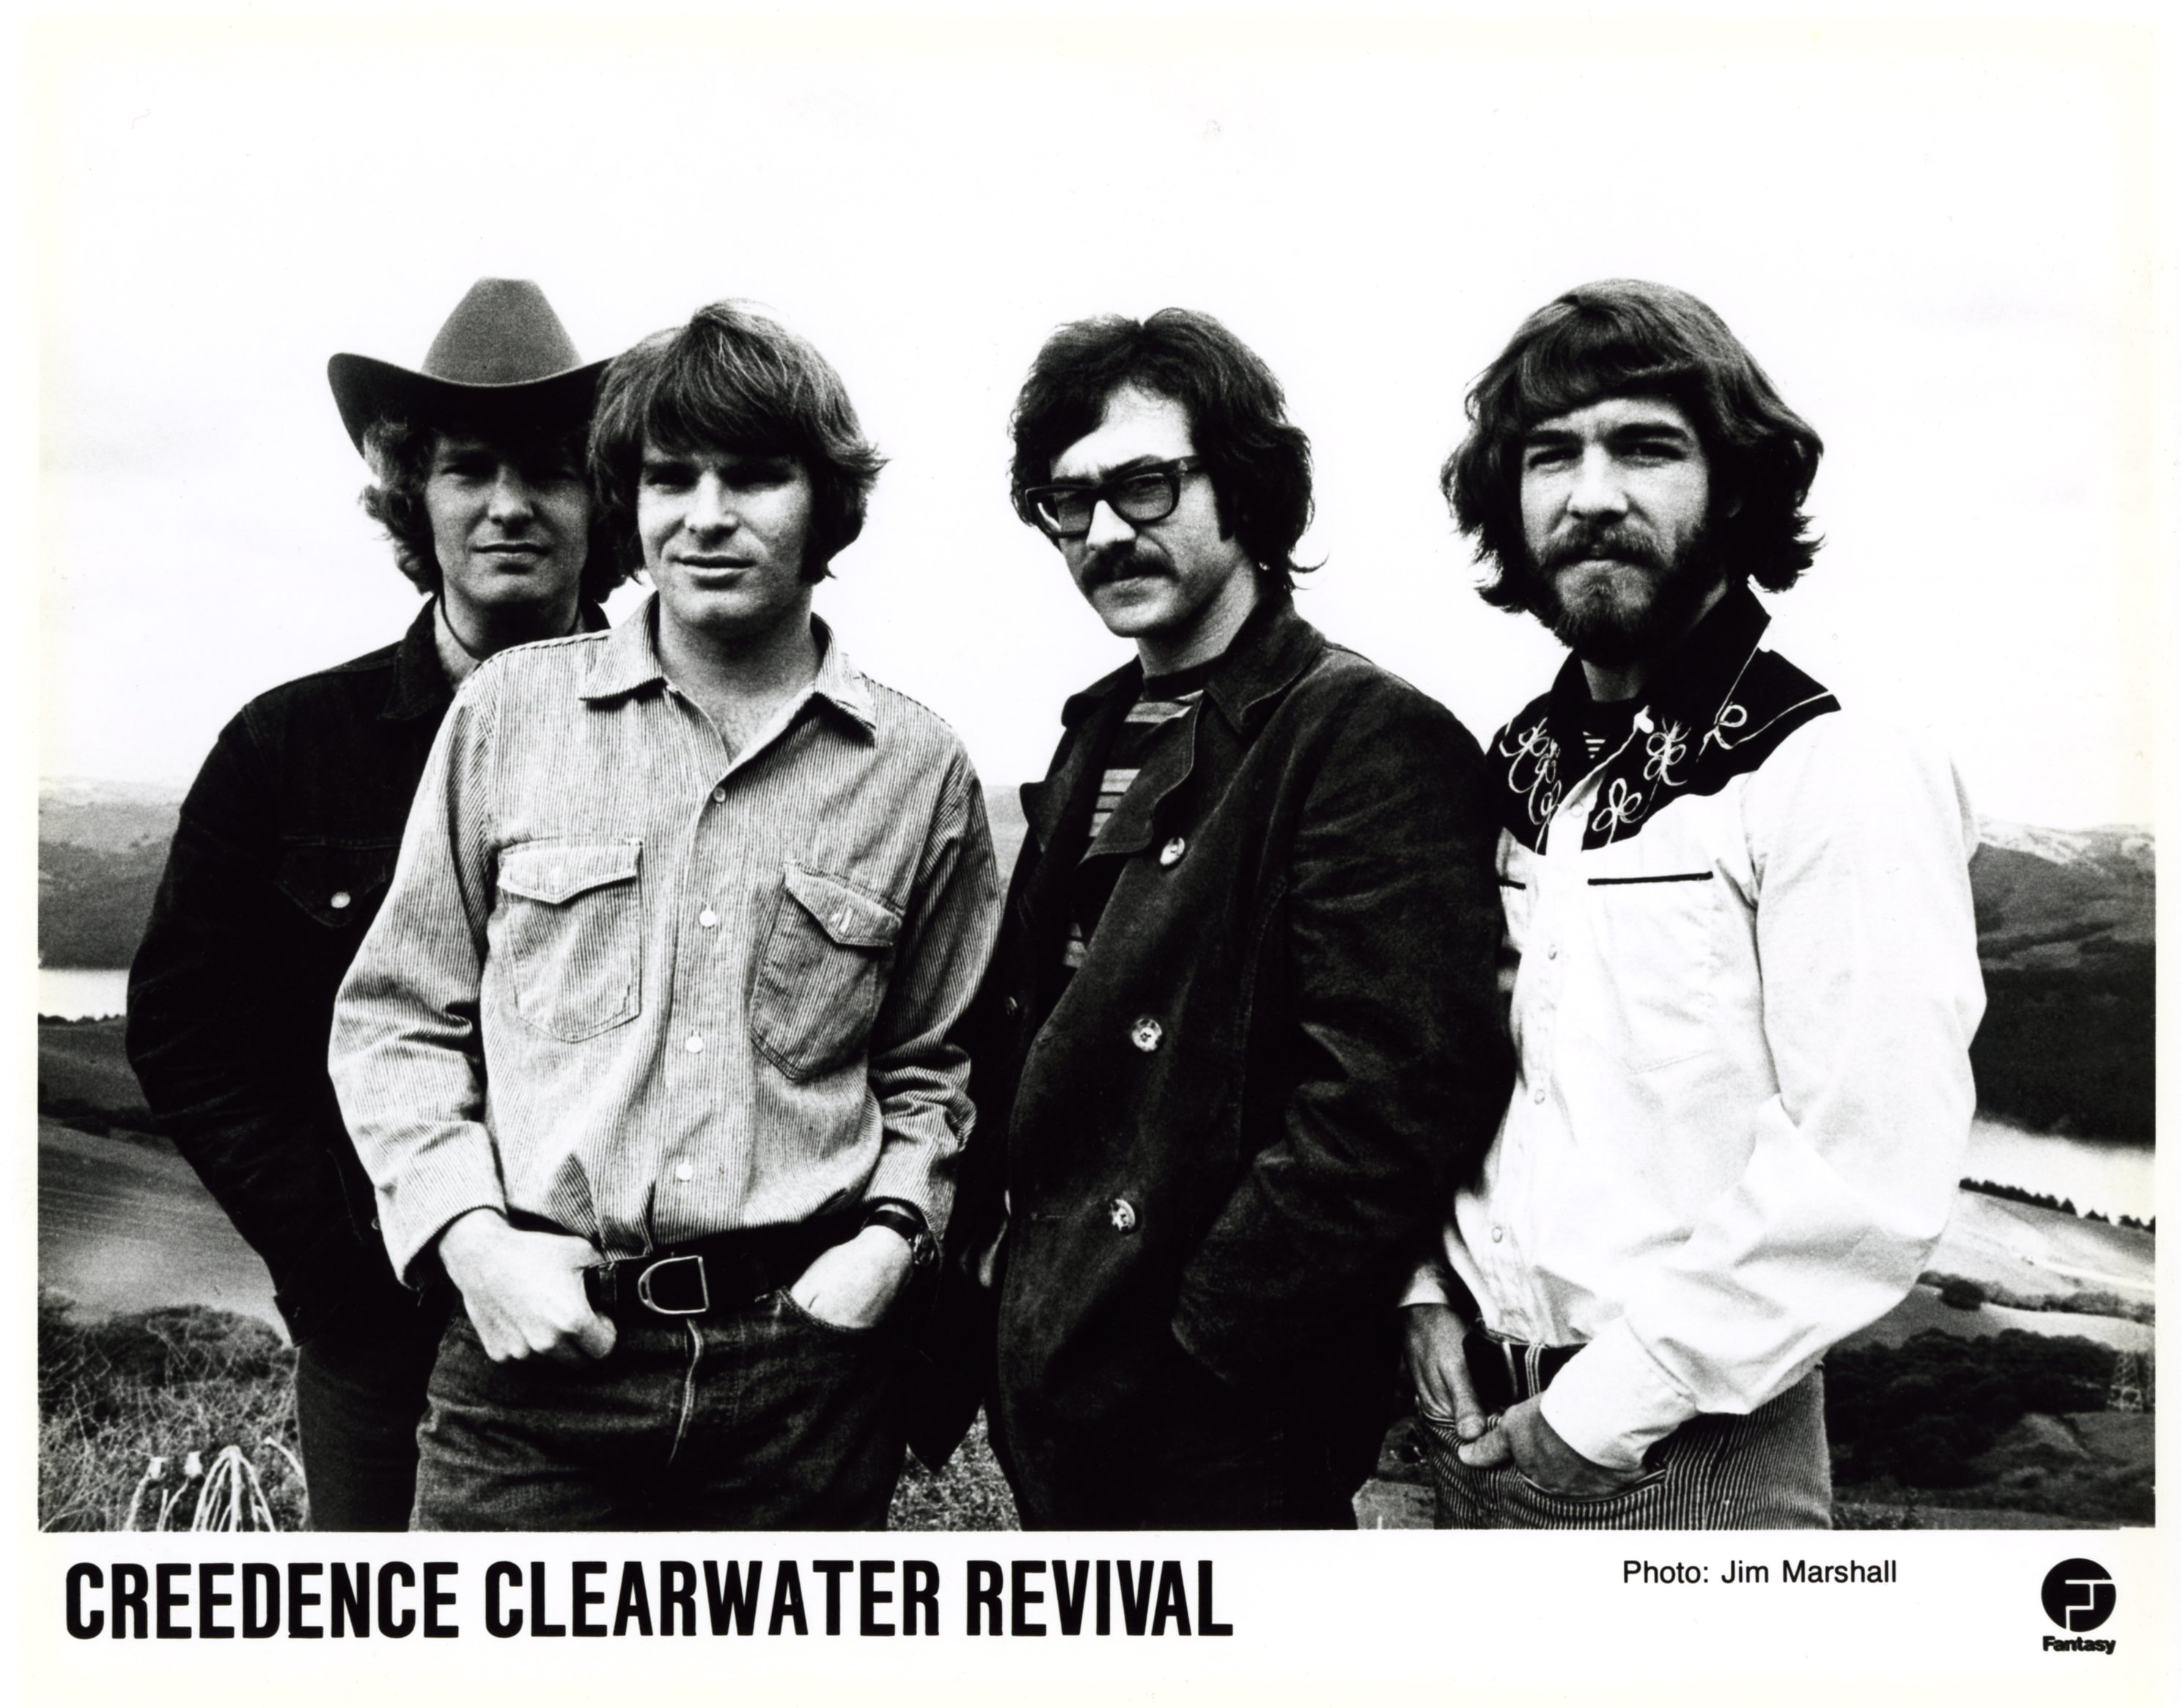 creedence clearwater revival tour band members